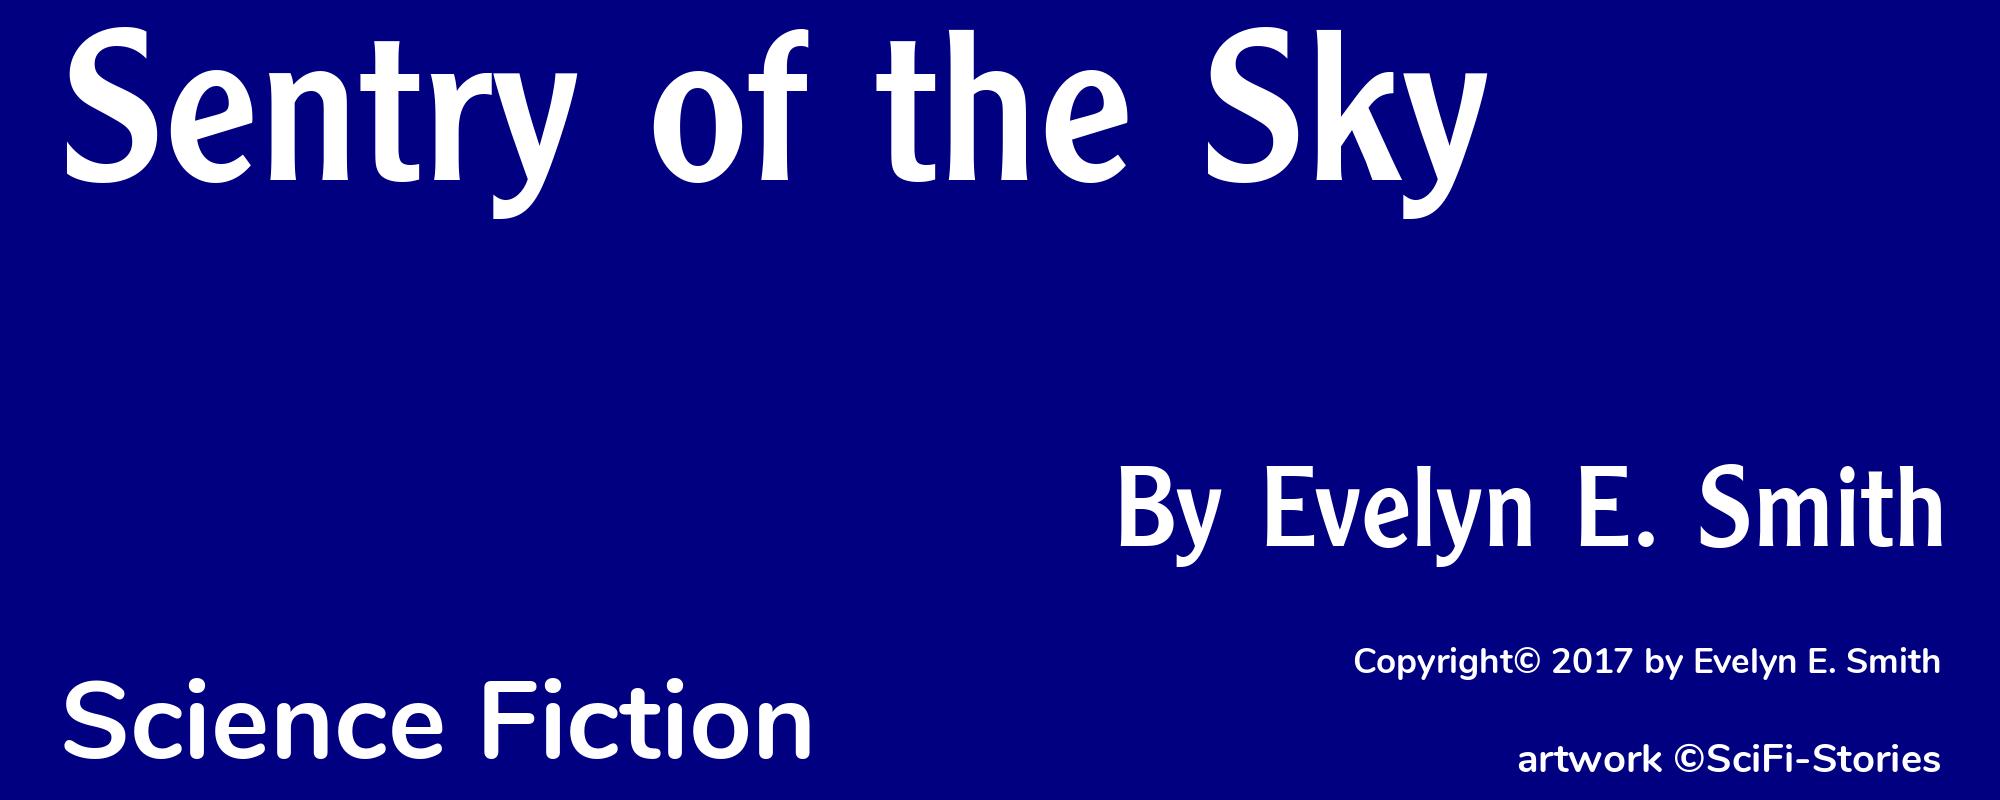 Sentry of the Sky - Cover